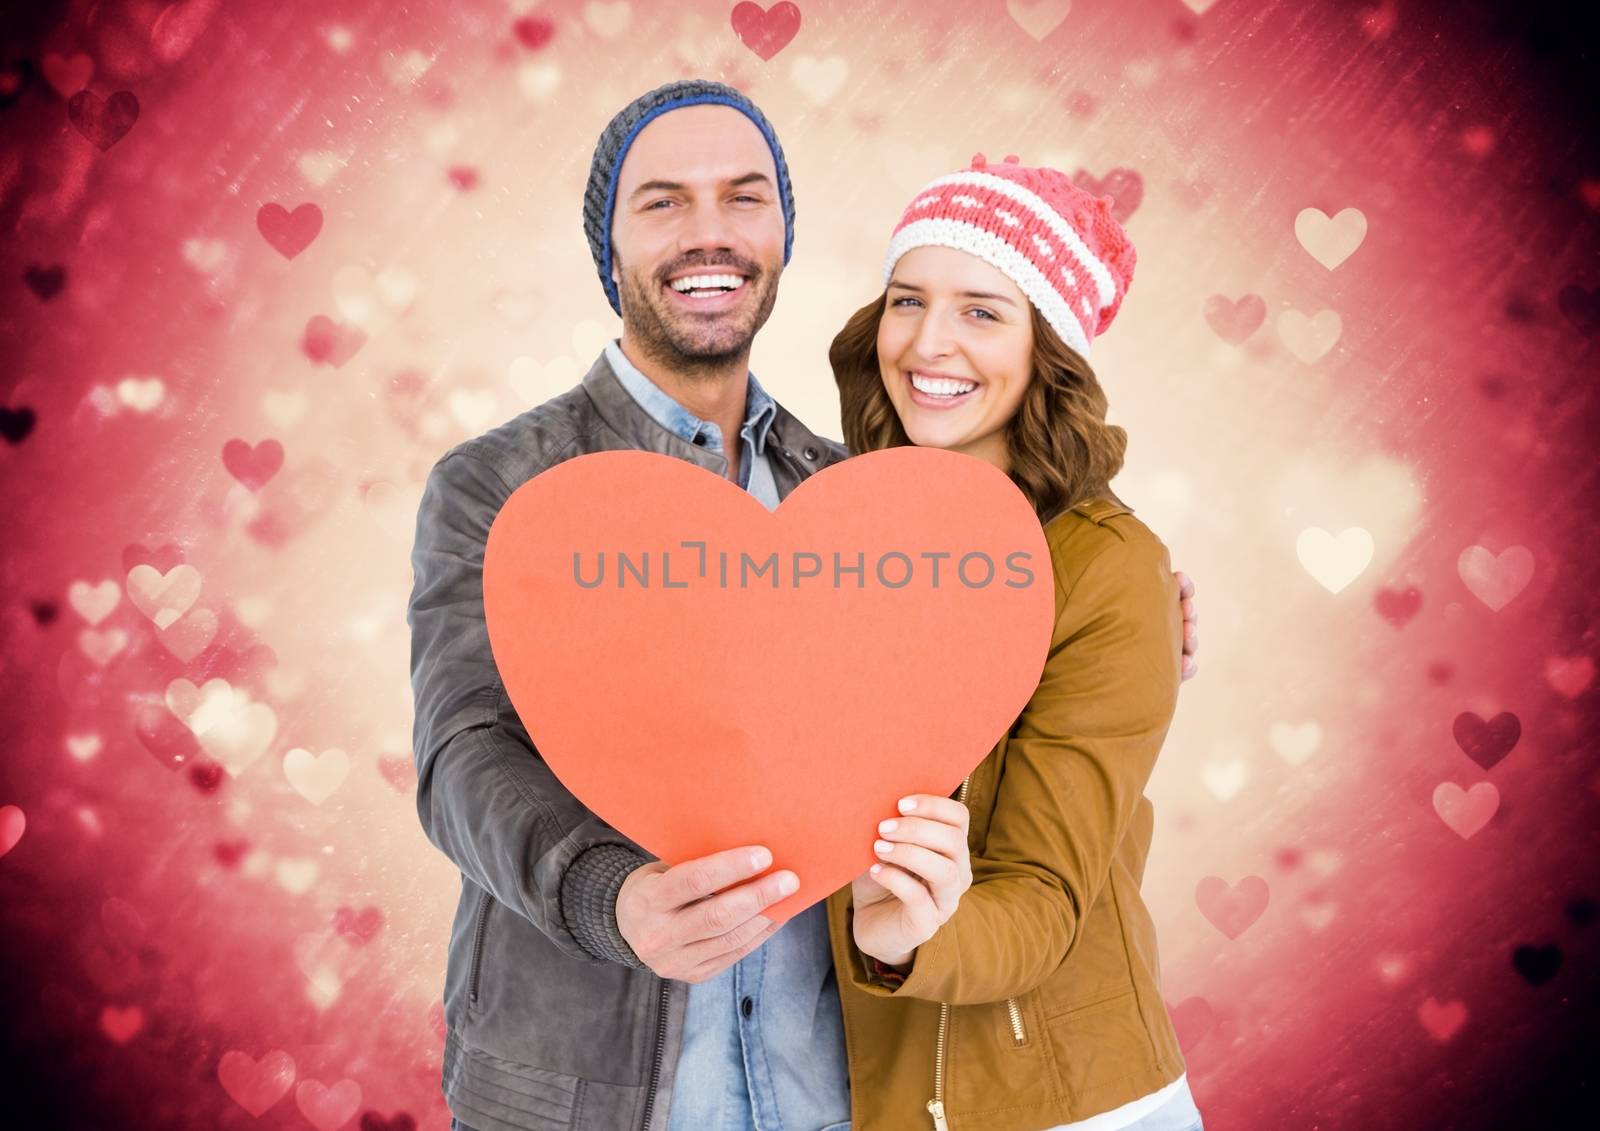 Romantic couple holding a heart against digitally generated background